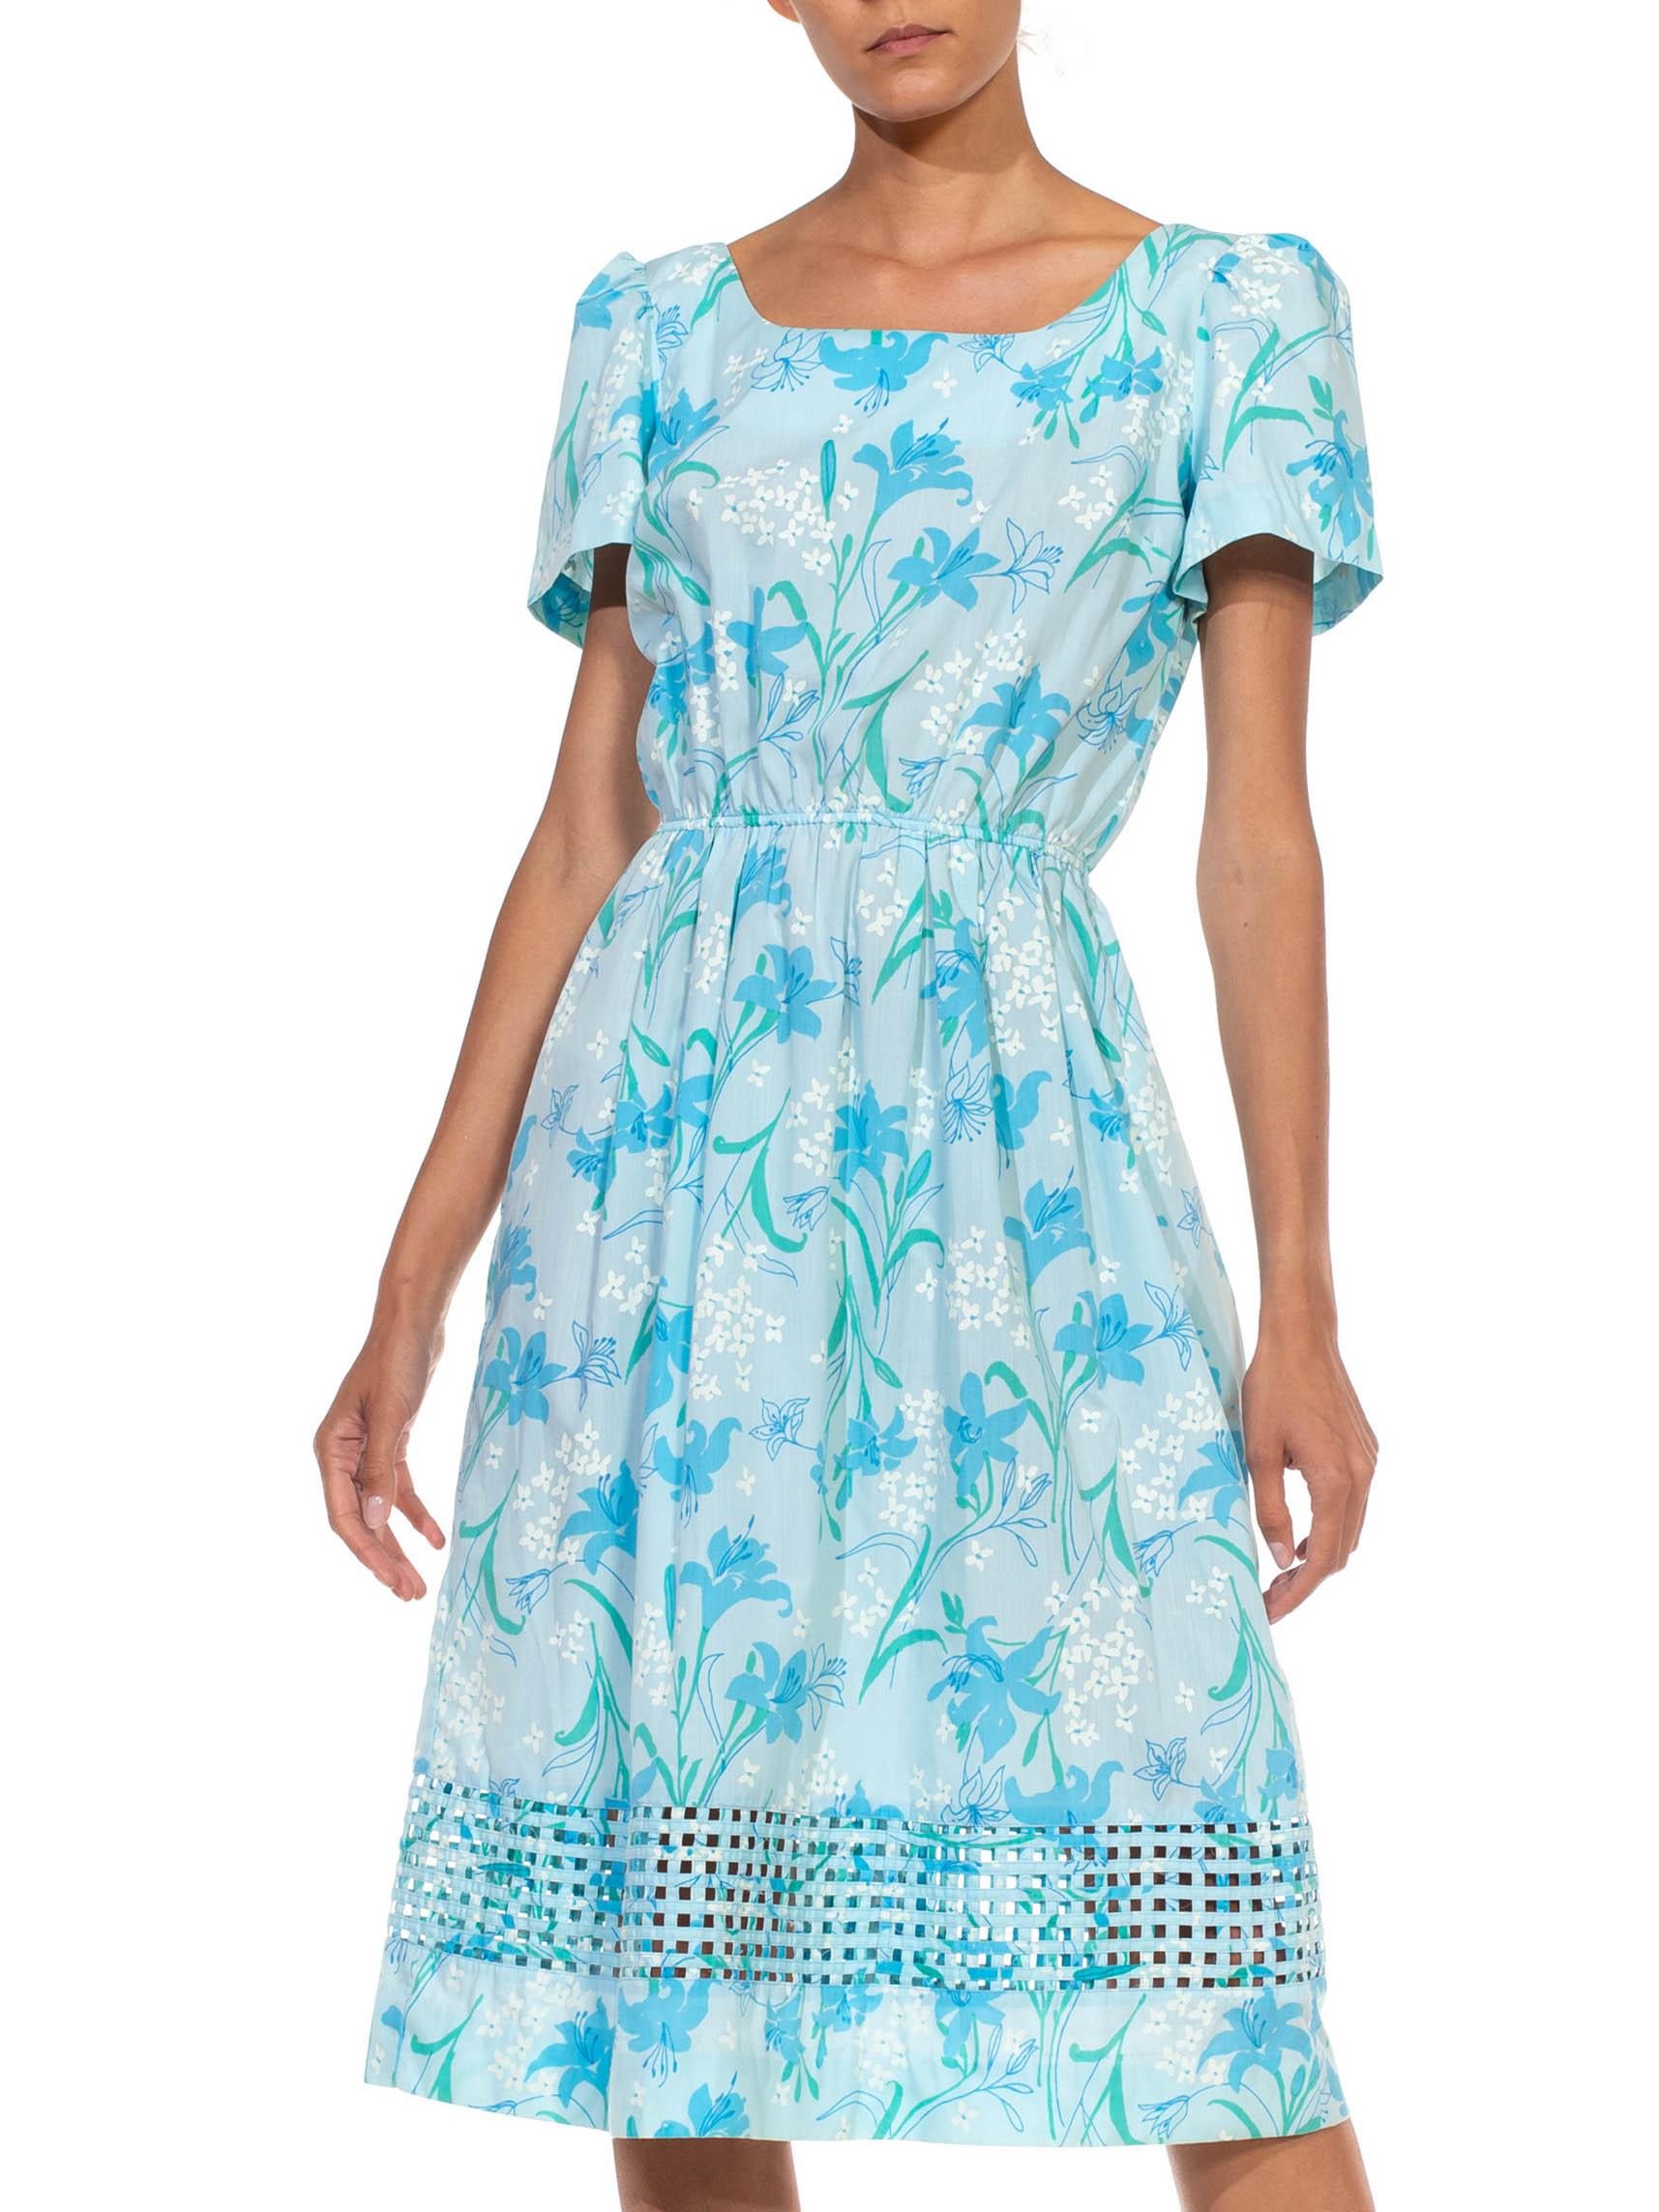 blue and white lilly pulitzer dress